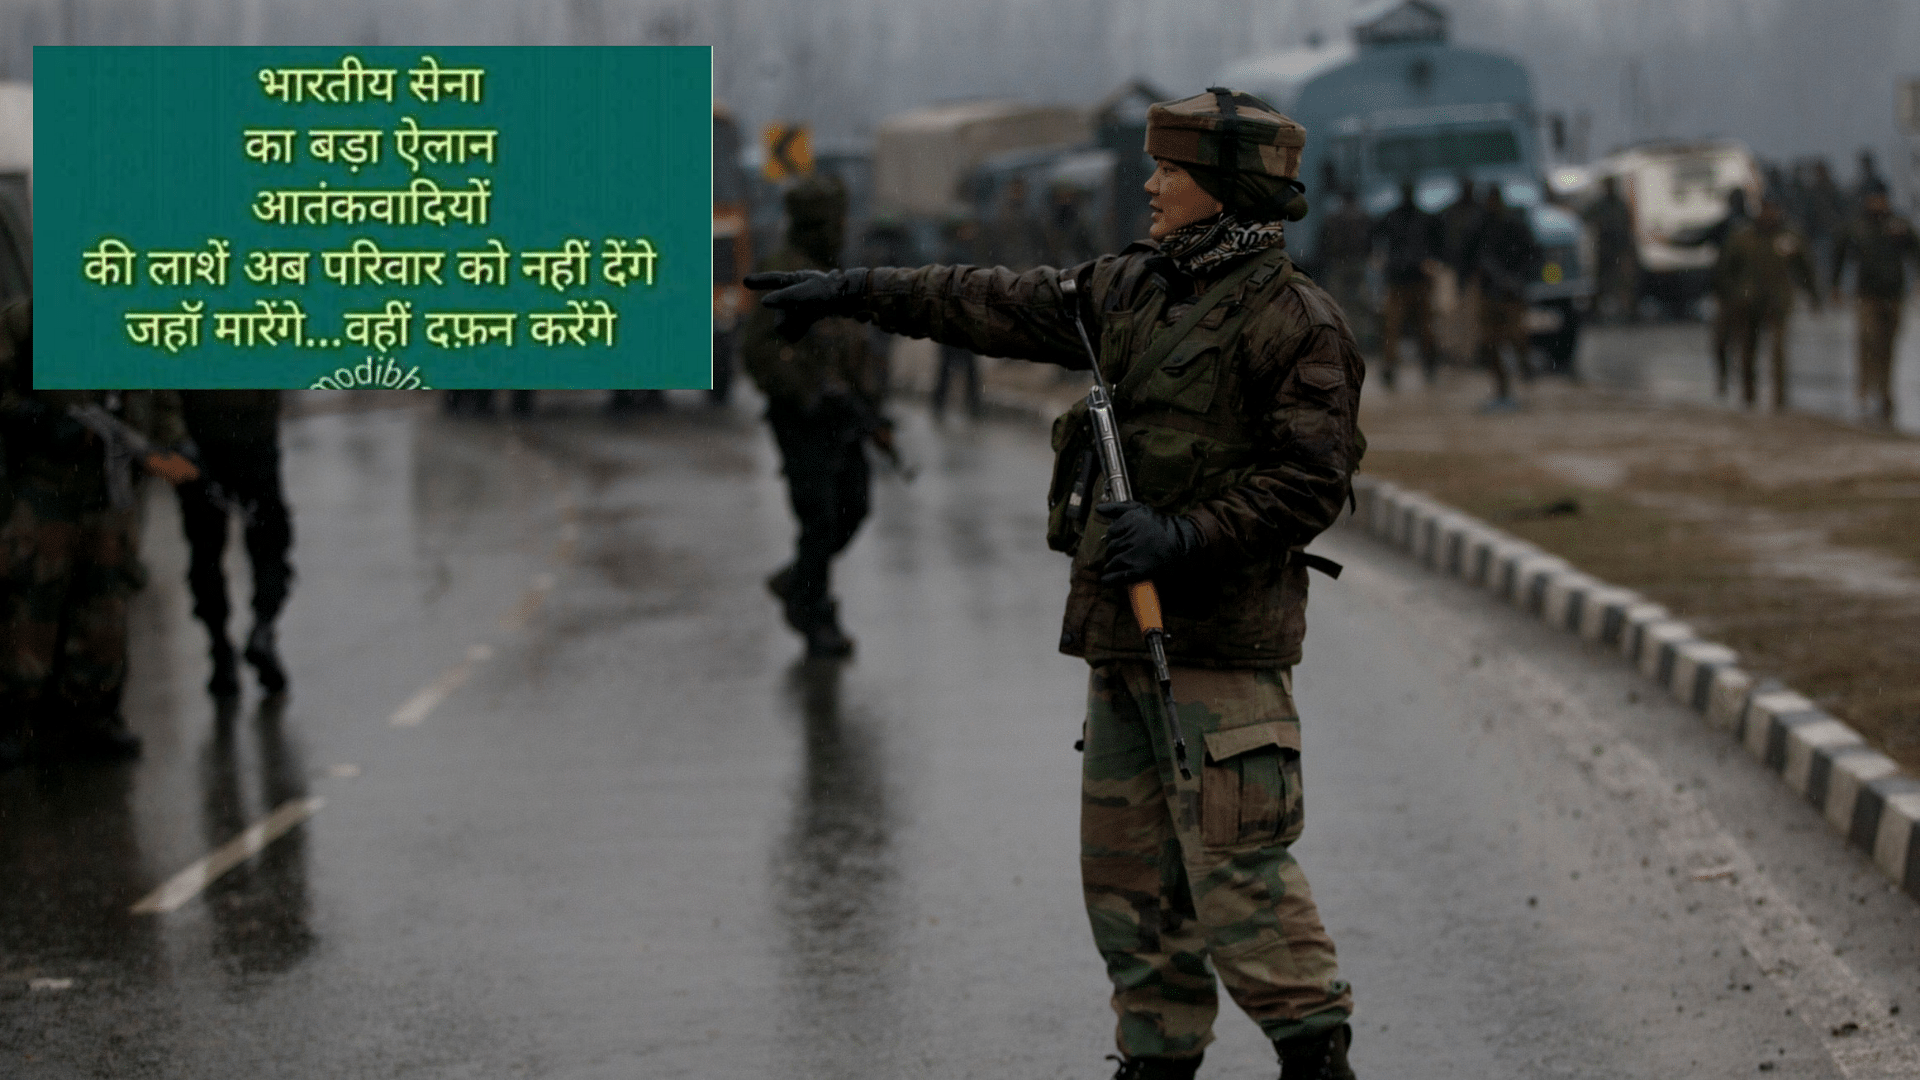 Many fake news posts have cropped up in the wake of the Pulwama attack that killed 40 CRPF jawans.&nbsp;